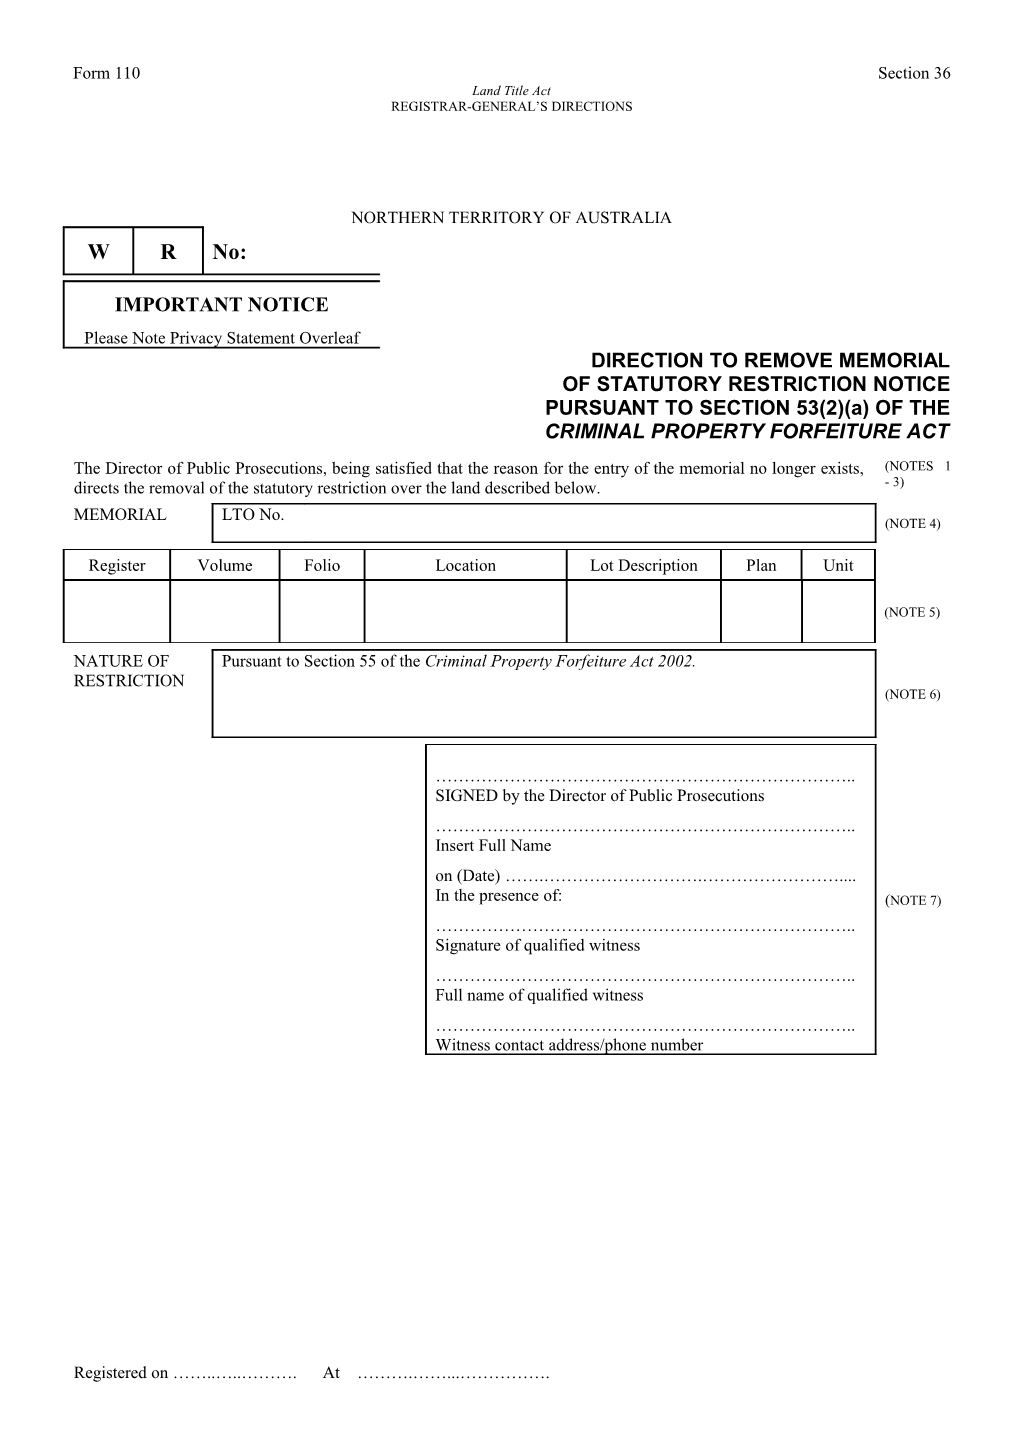 Form No. 110 - Direction to Remove Memorial of Statutory Restriction Notice Pursuant To